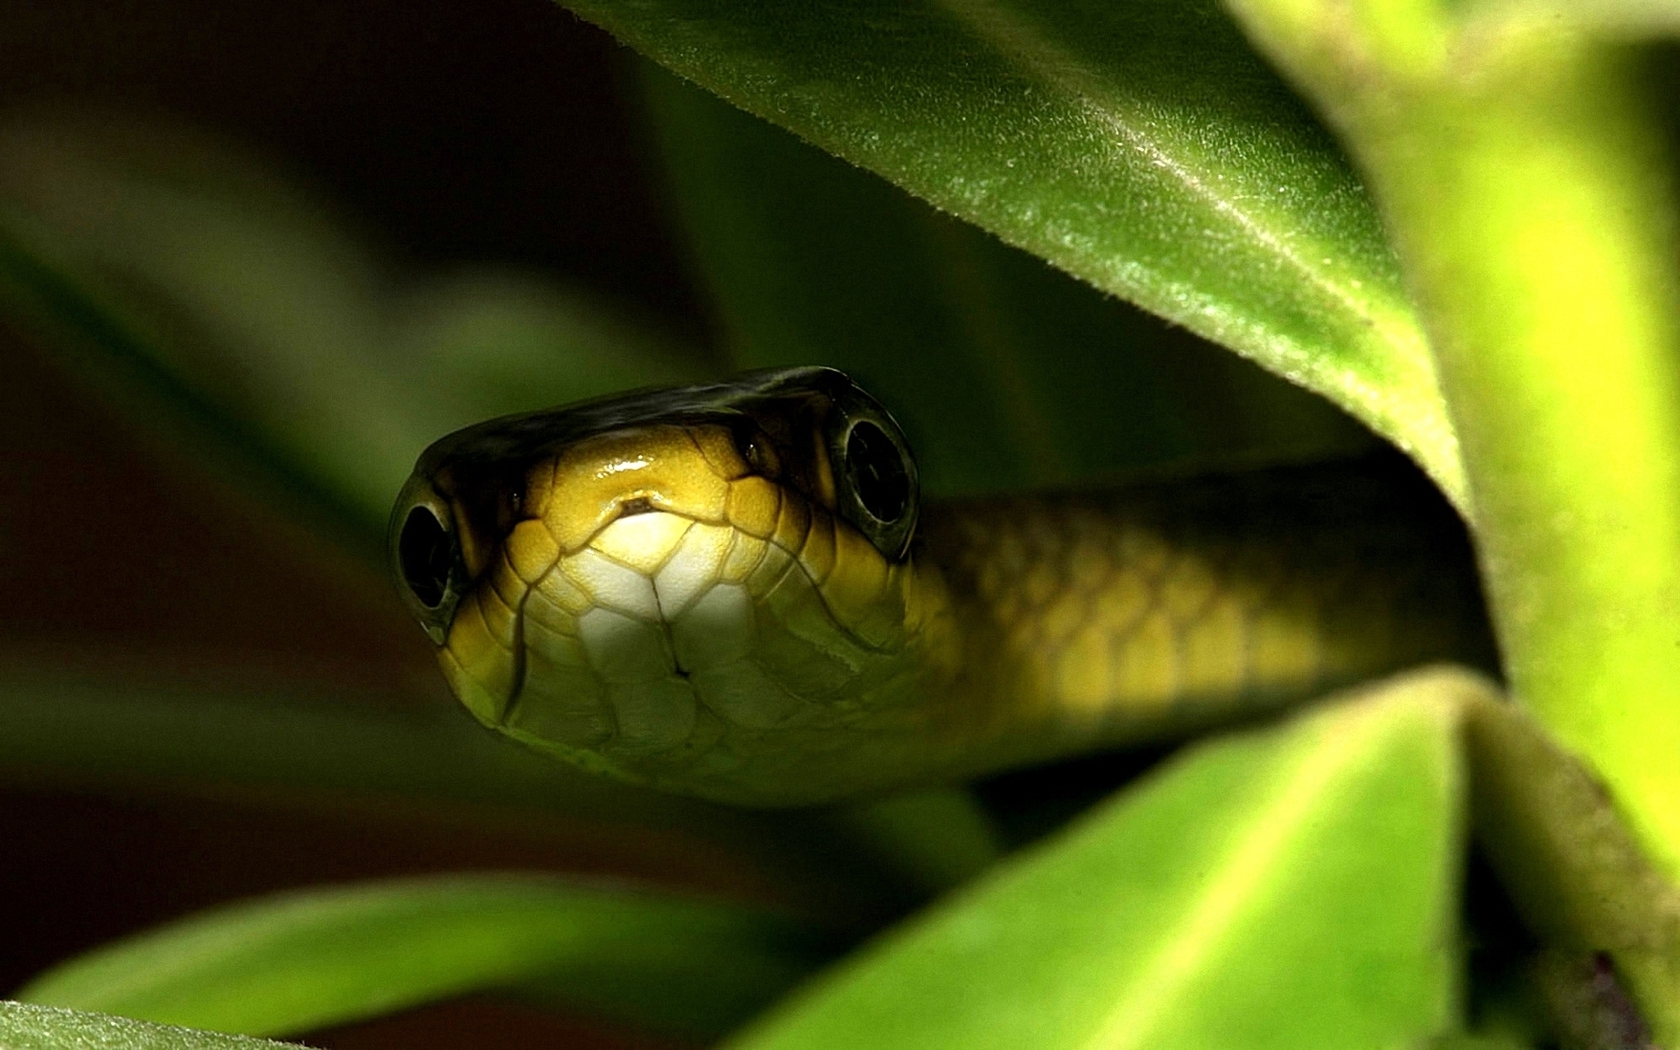 Animals_Reptiles_Snake_in_the_Grass_0324